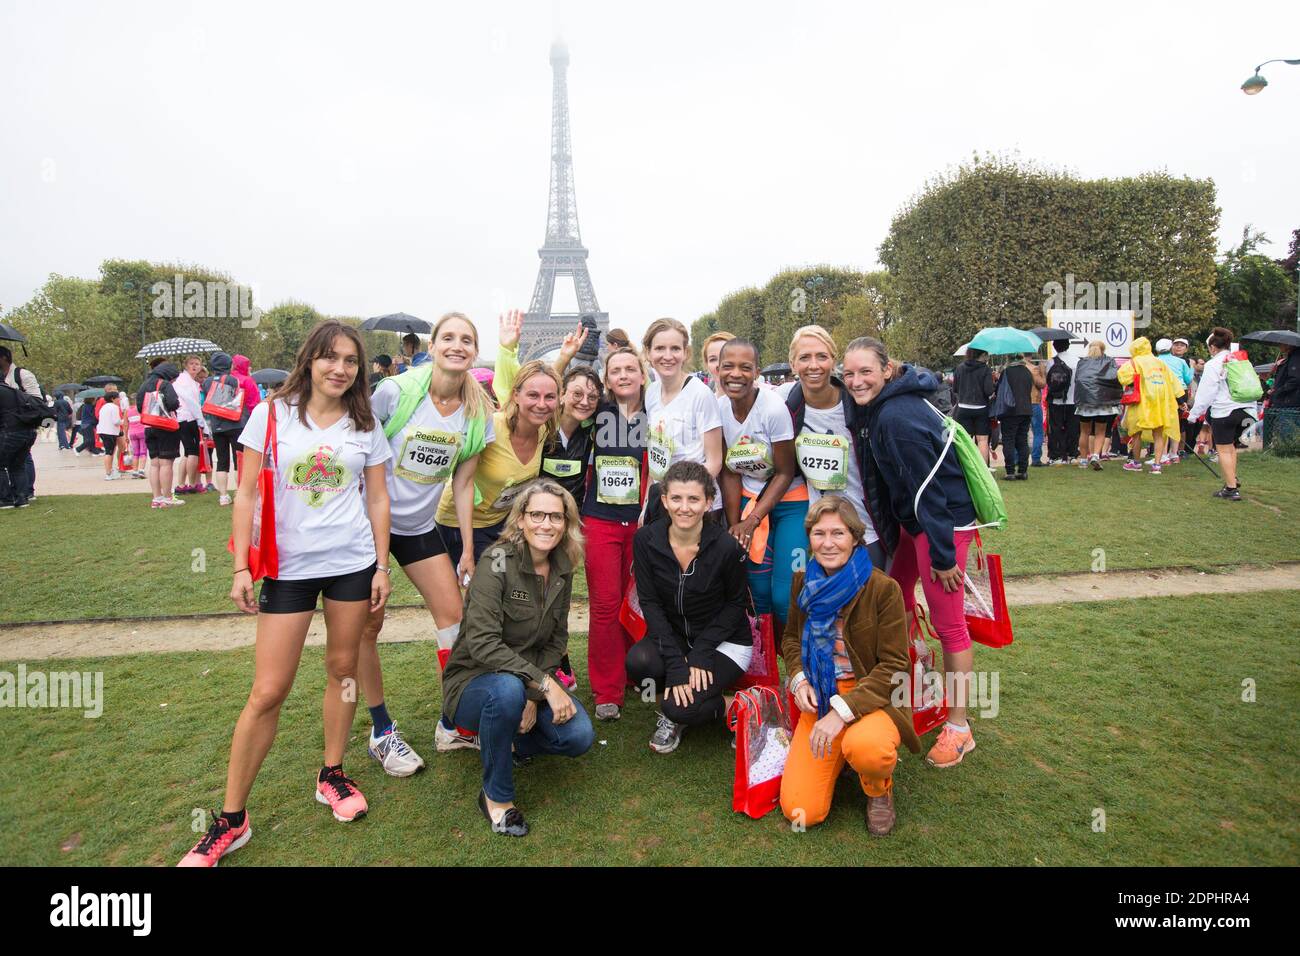 Nathalie Kosciusko Morizet (aka NKM) pictured after running La Parisienne  (a 7 kilometers run for women through Paris streets) on september 13, 2015,  in Paris, France. NKM has been running surrounded by